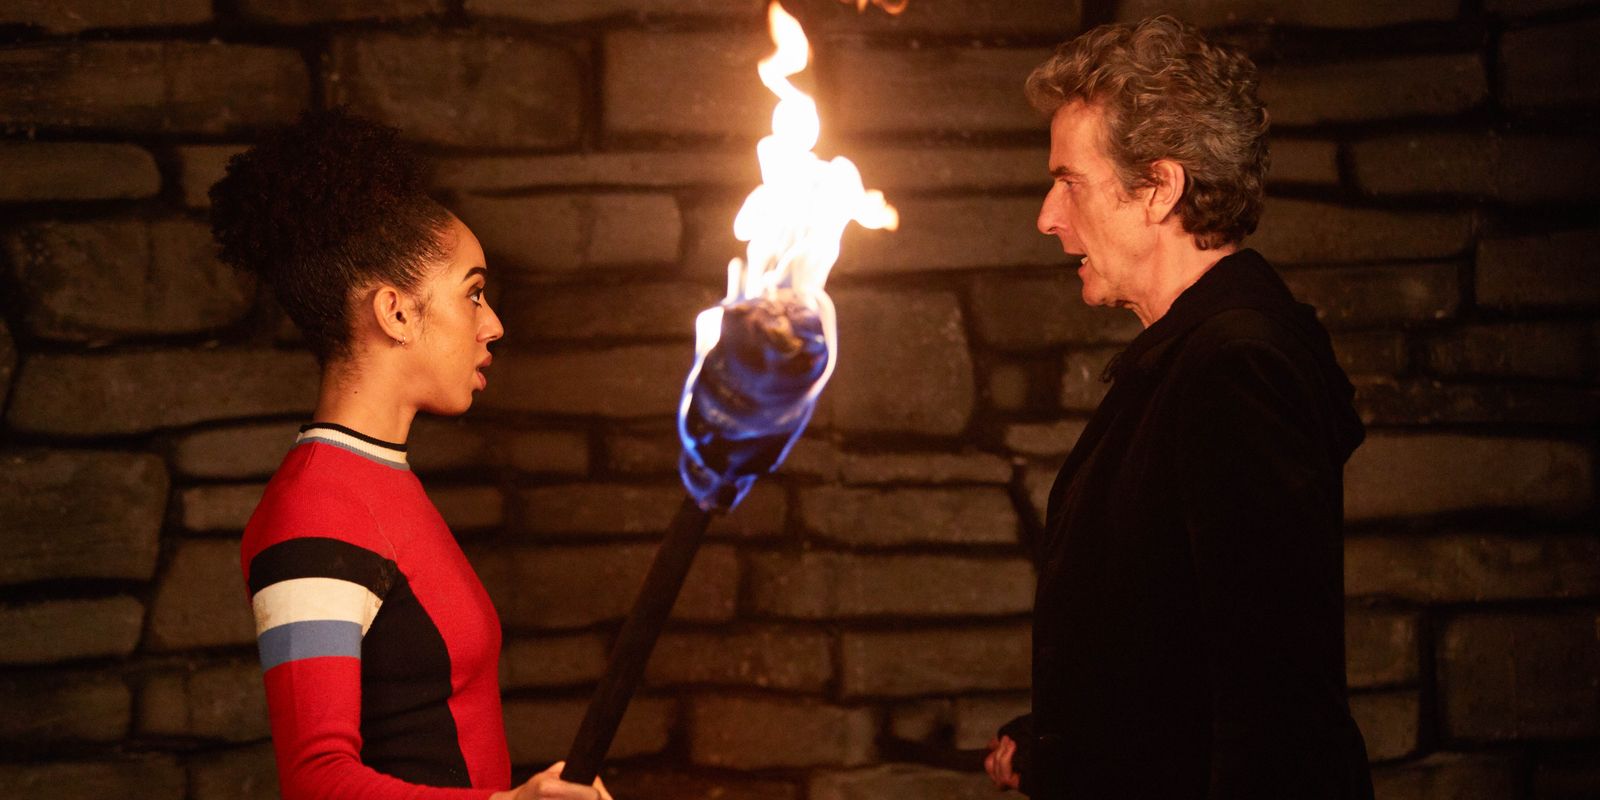 Pearl Mackie and Peter Capaldi in Doctor Who Season 10 Episode 10